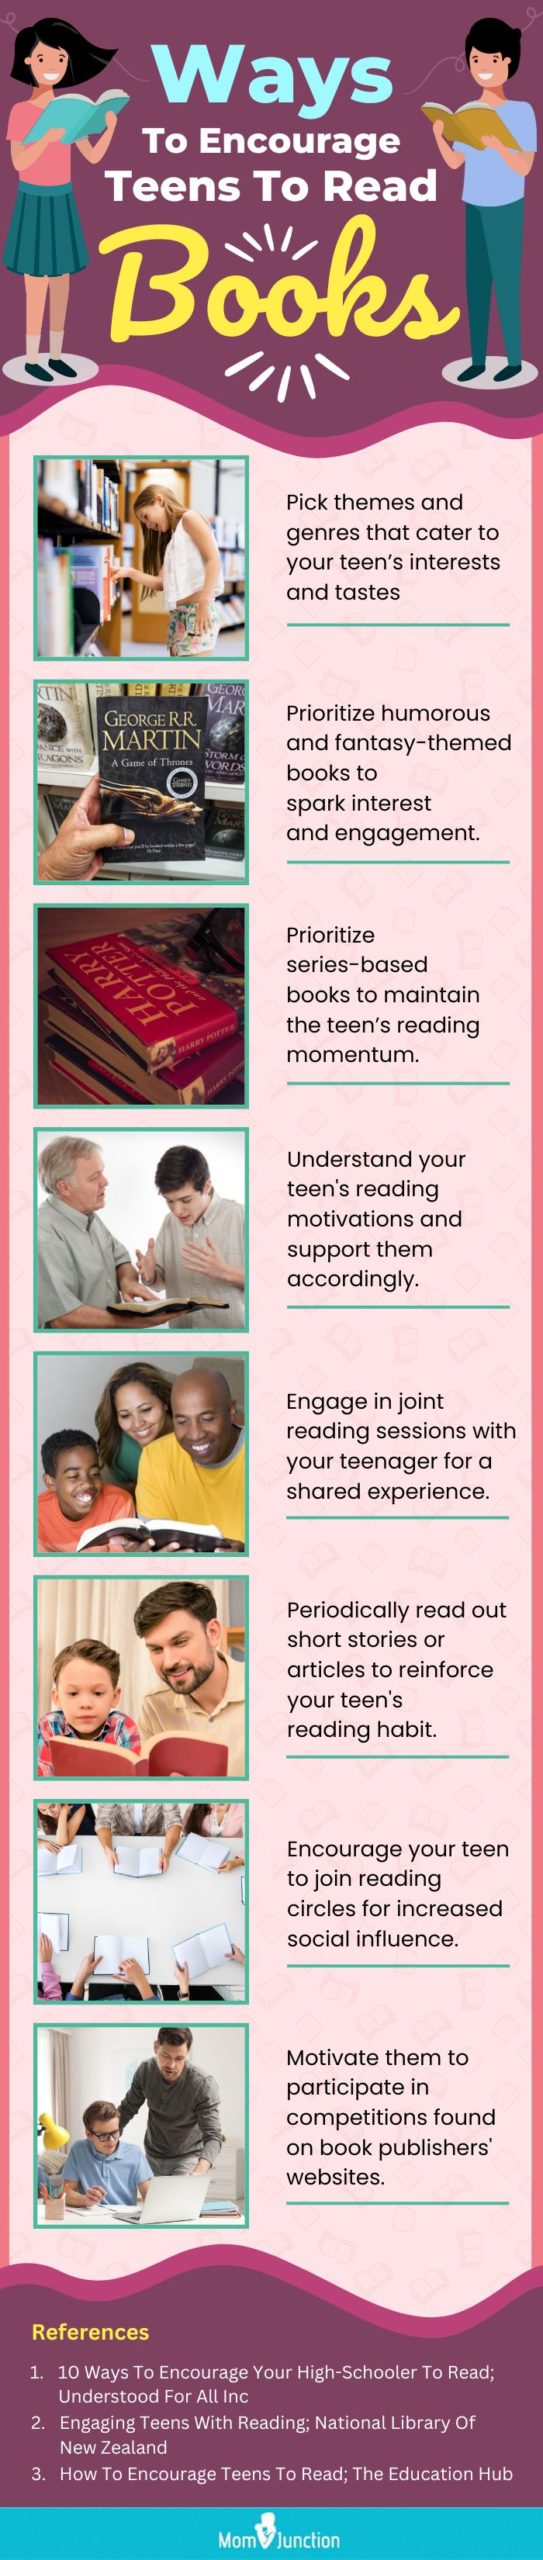 Ways To Encourage Teens To Read Books (infographic)